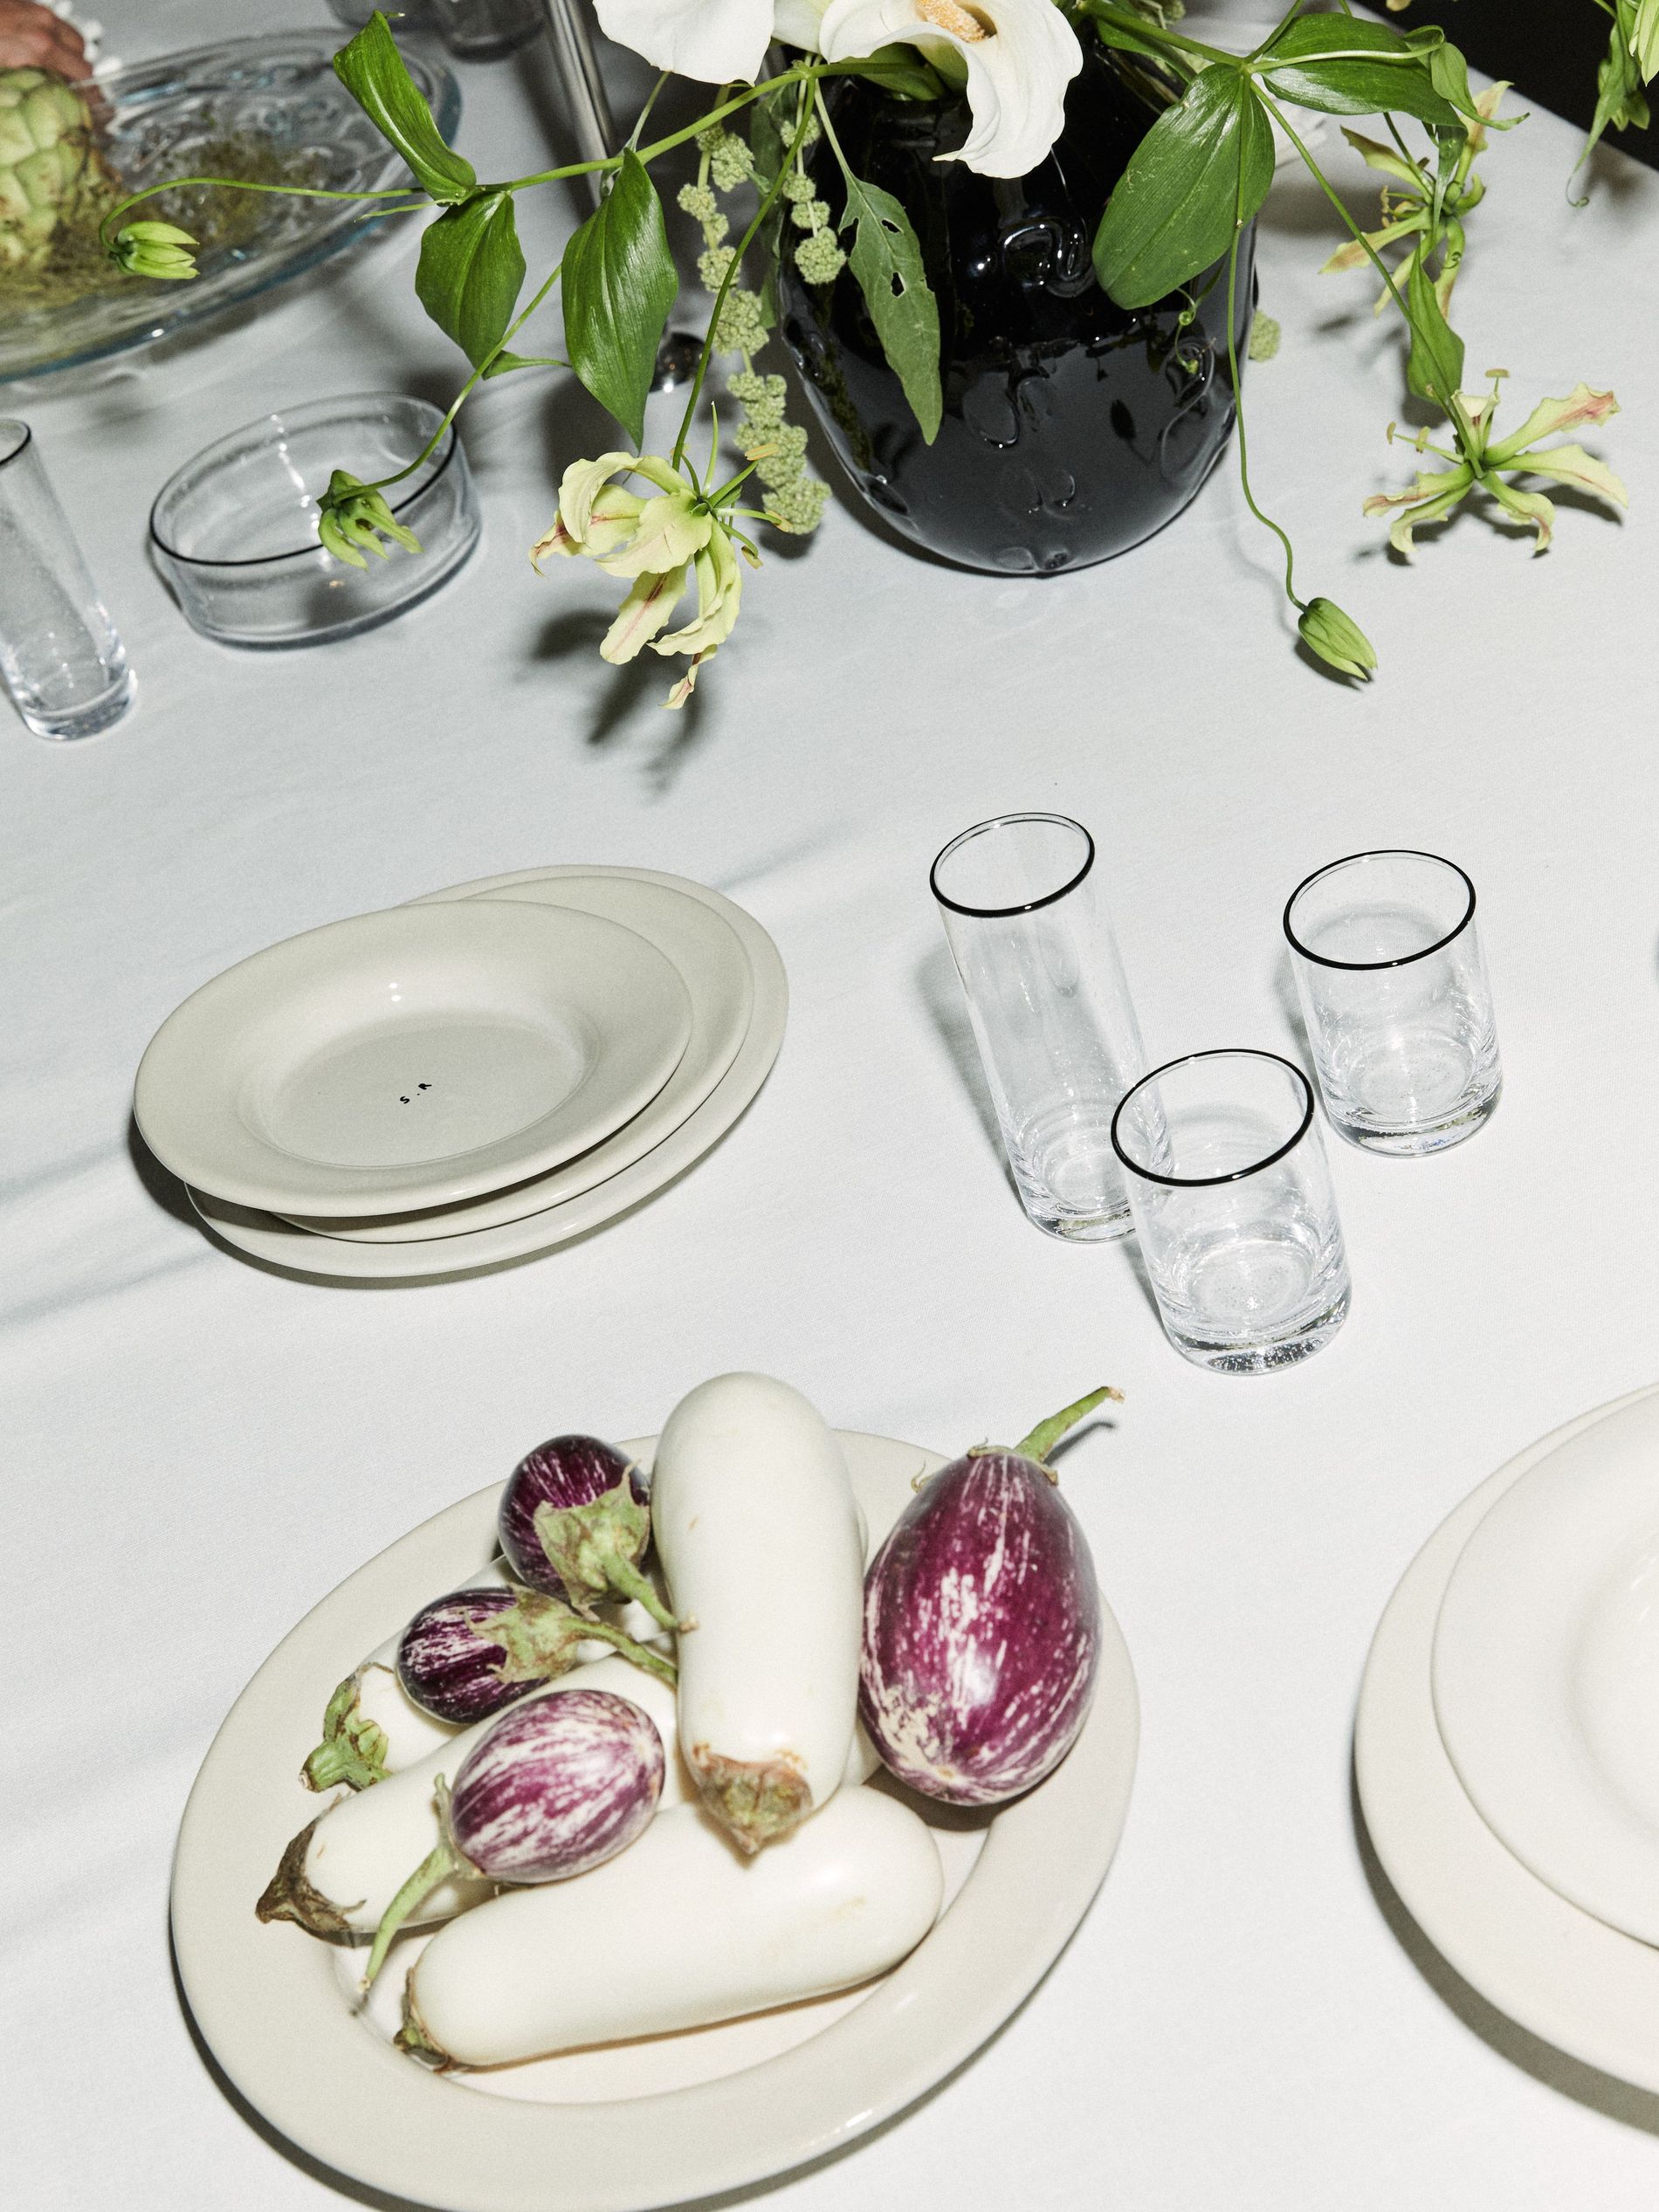 Table scape of Sophia Roe's interior collaboration, highlighting plates and glassware